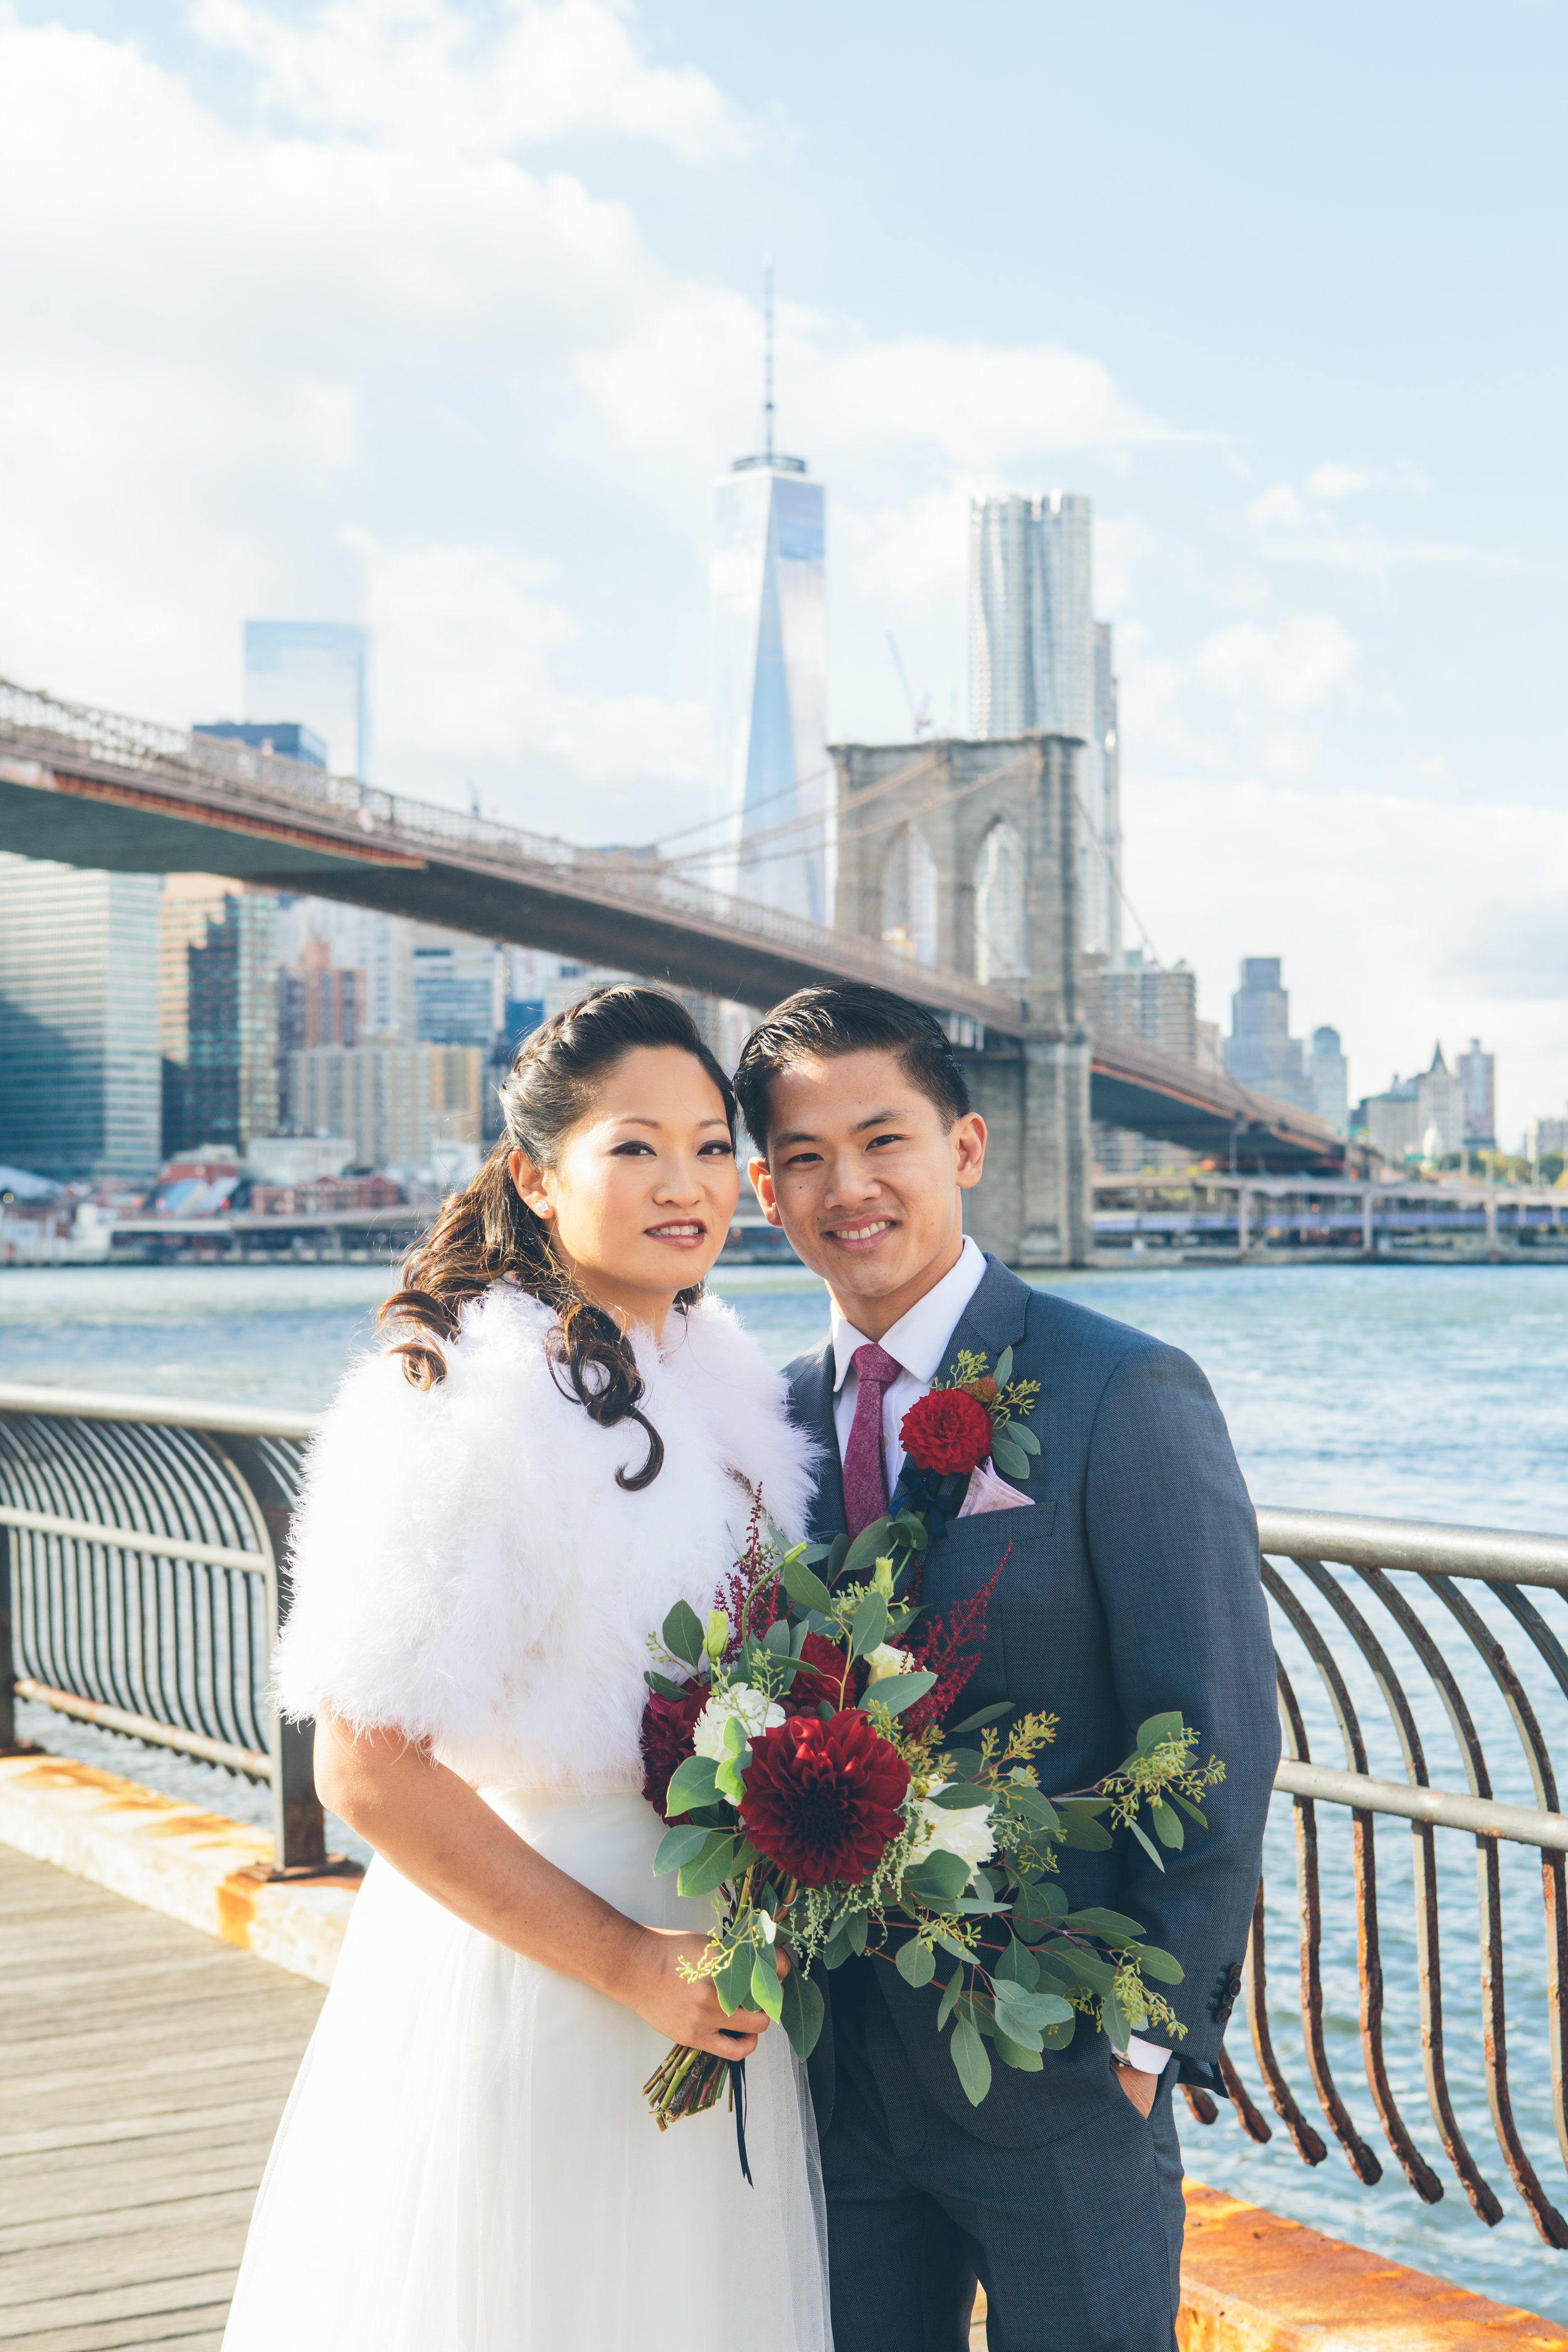 Dumbo Wedding Photos New York City Wedding Engagement City Hall Elopement And Intimate Ceremony Photographer Nyc Wedding City Hall Elopement And Engagement Photographer Cynthia Chung Weddings,What Is Negative Energy Balance Quizlet